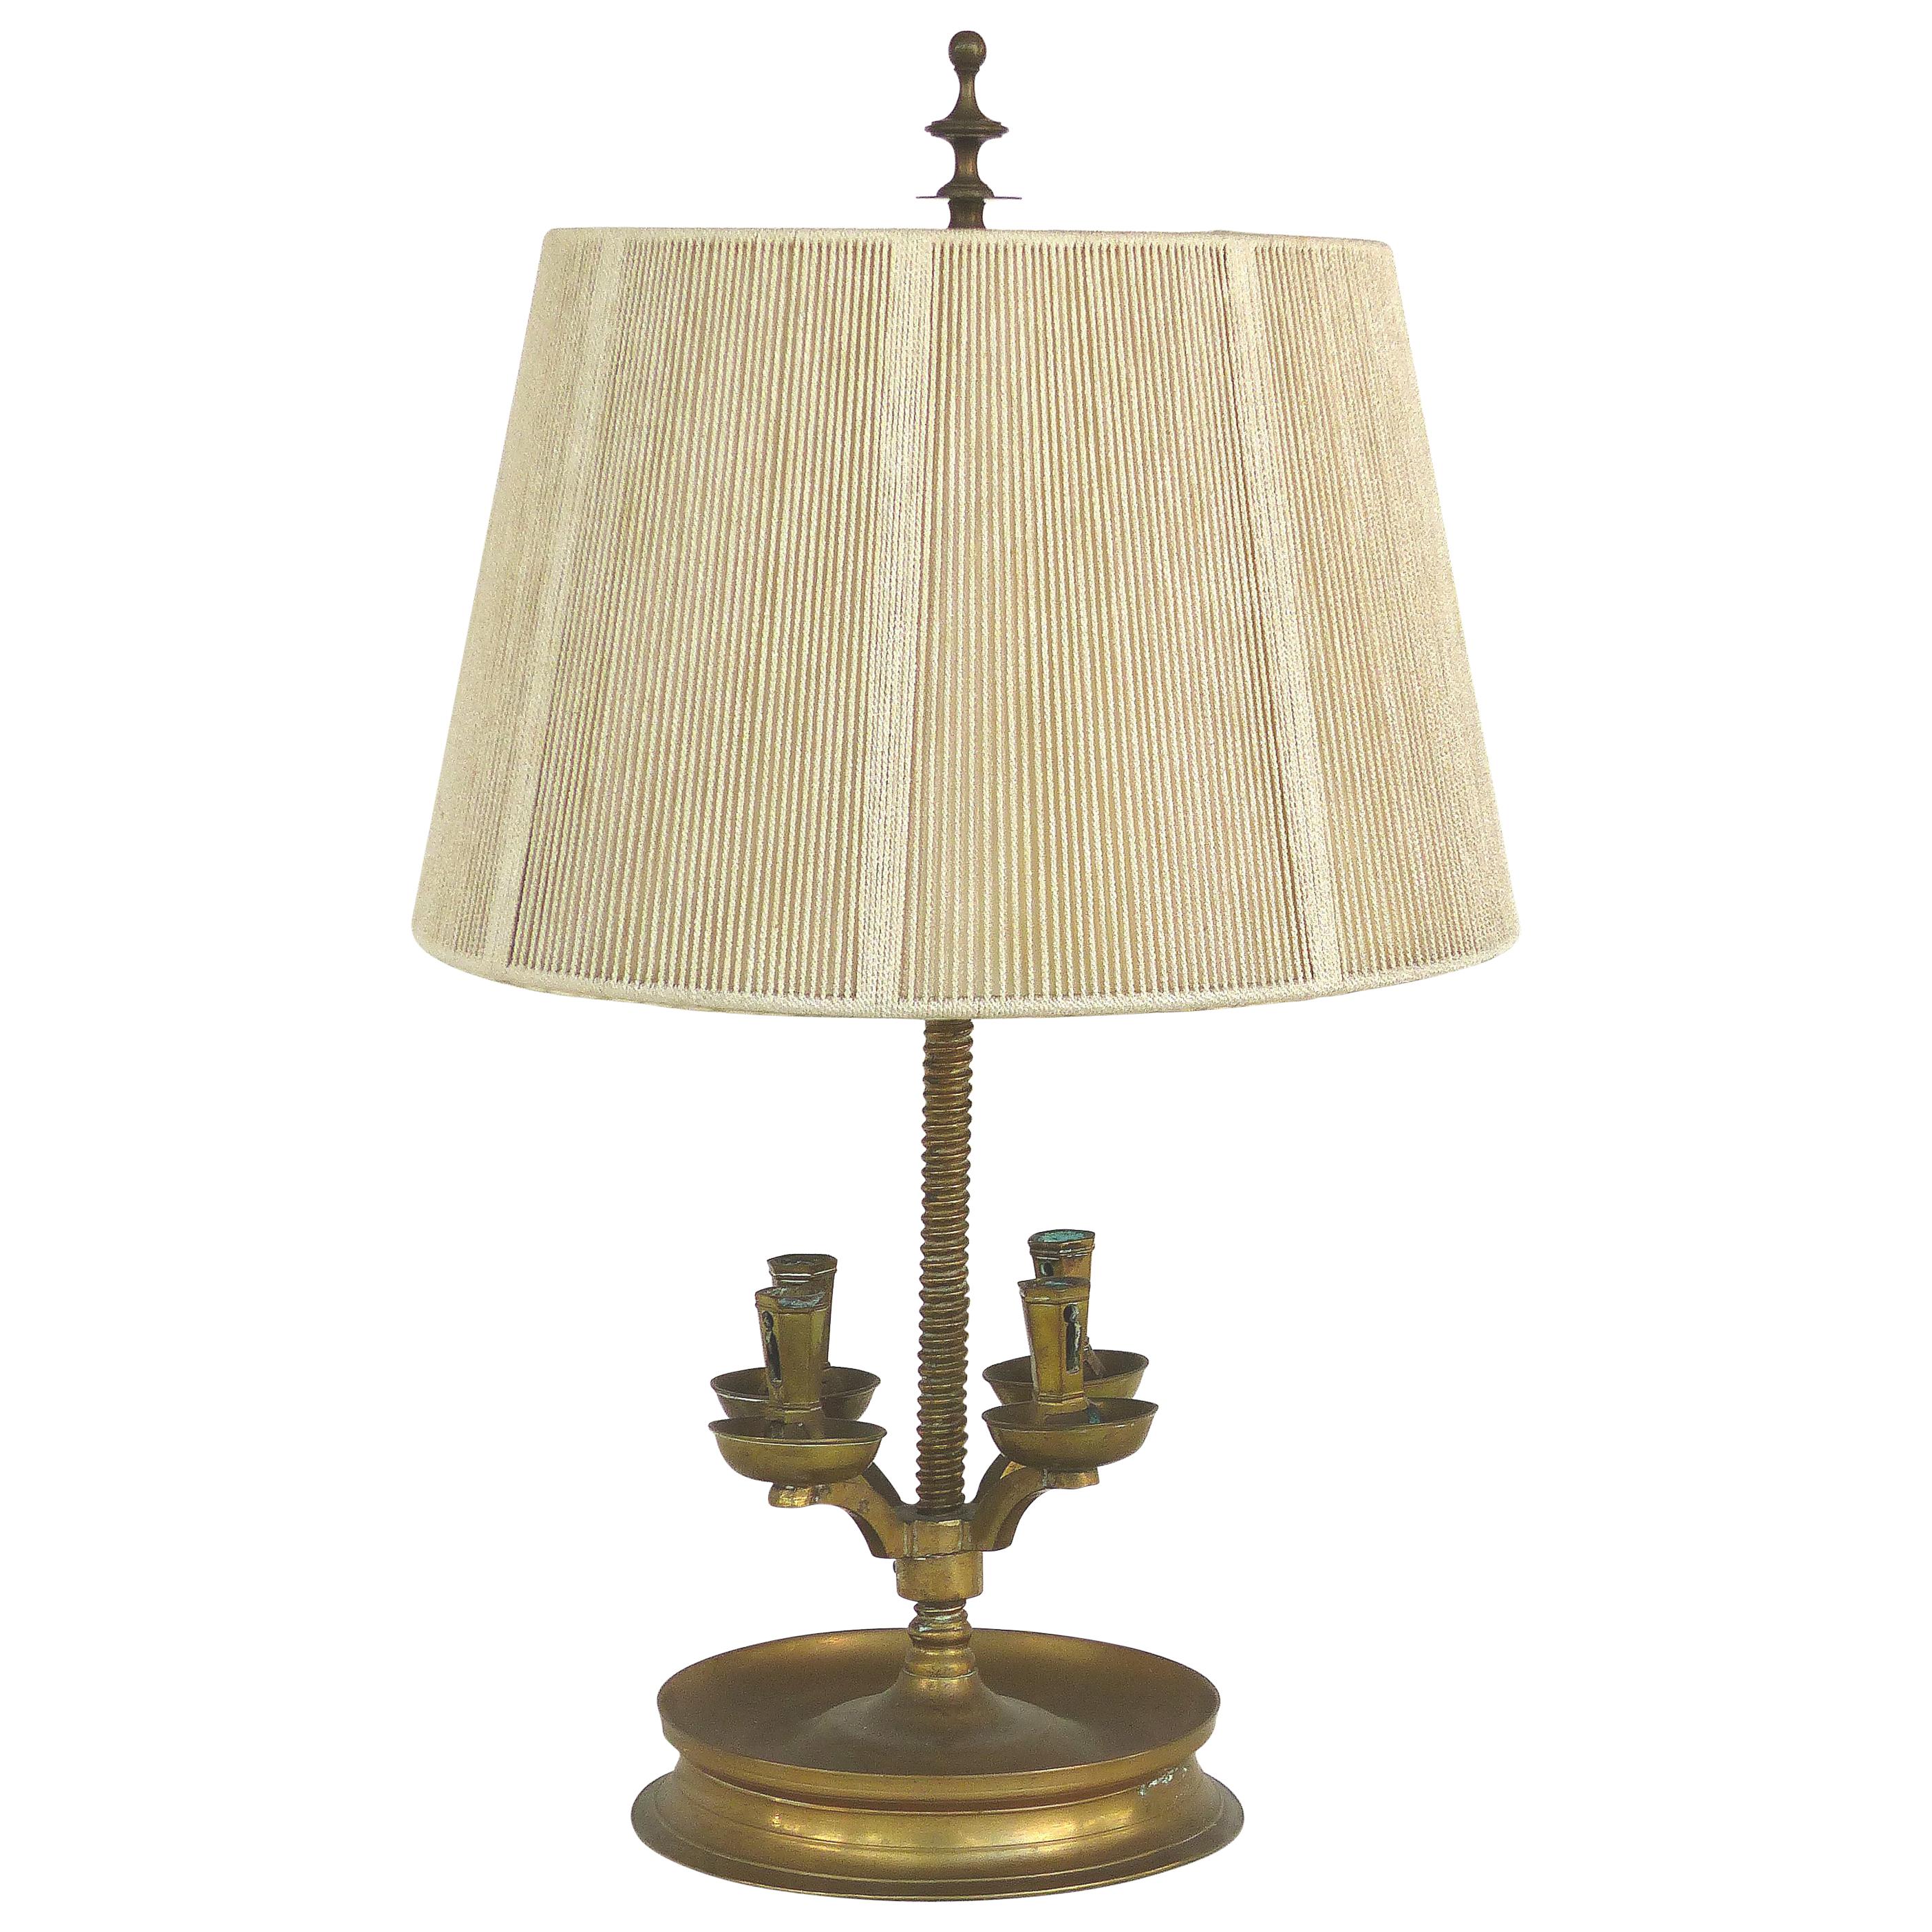 Brass 19th Century Candelabra Mounted as a Table Lamp, Including a String Shade